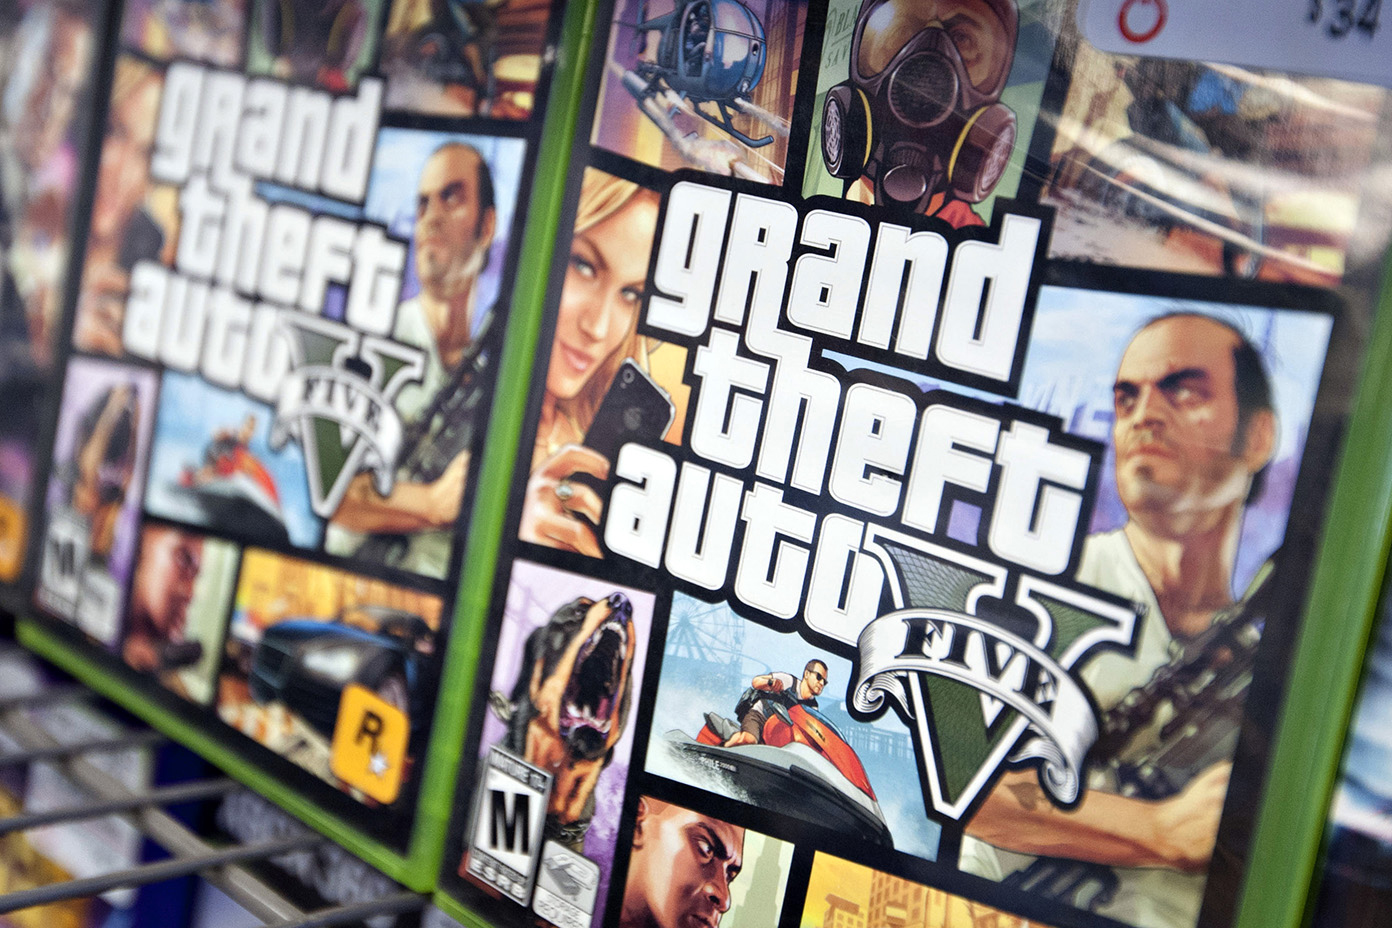 Two Official GTA 5 Mobile Apps Released by Rockstar - GTA BOOM